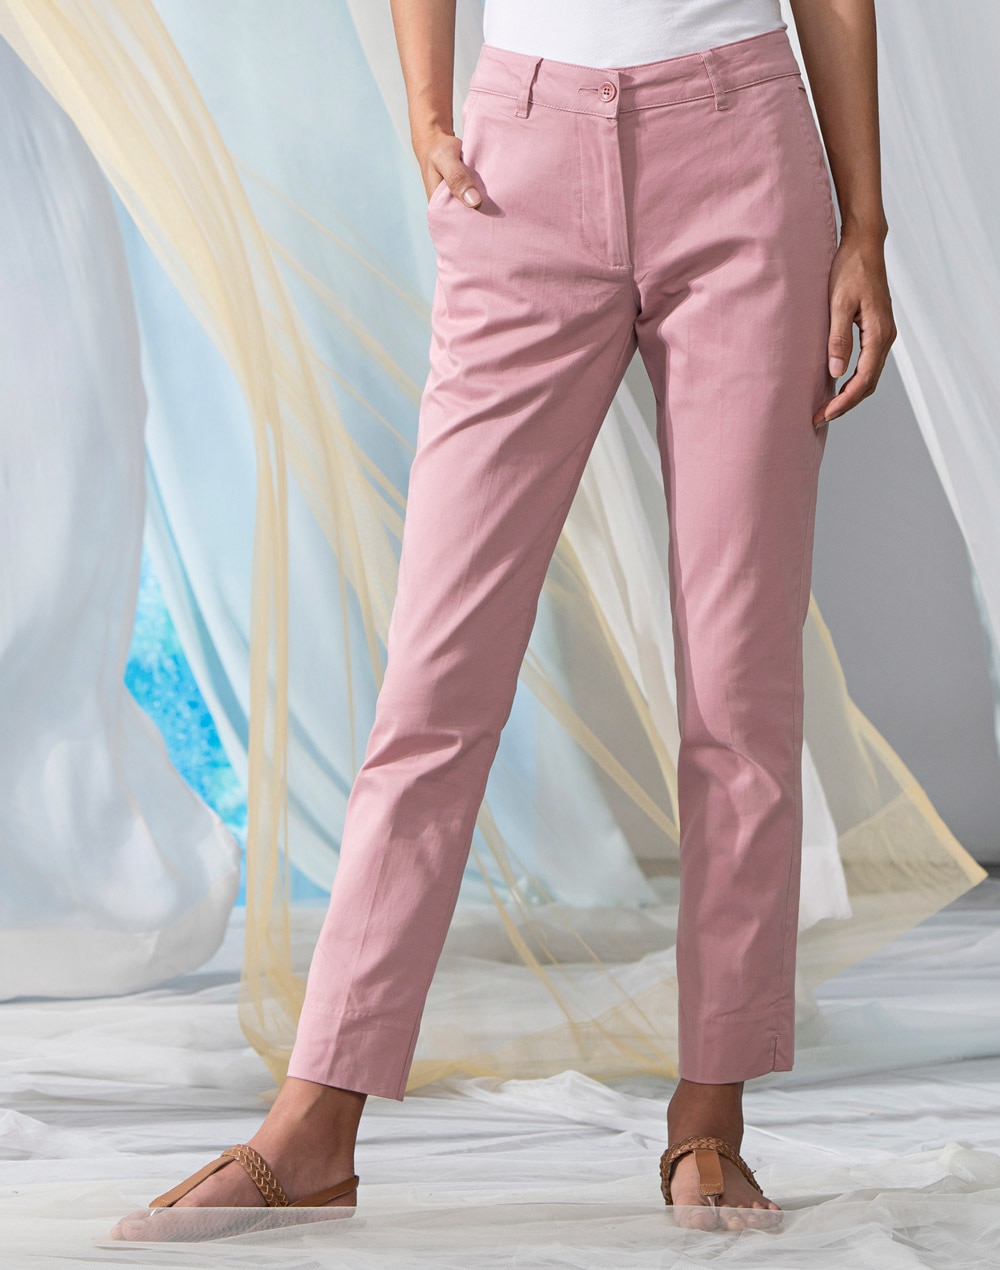 Buy Cotton Lycra Slim Fit Stretch Pant for Women Online at